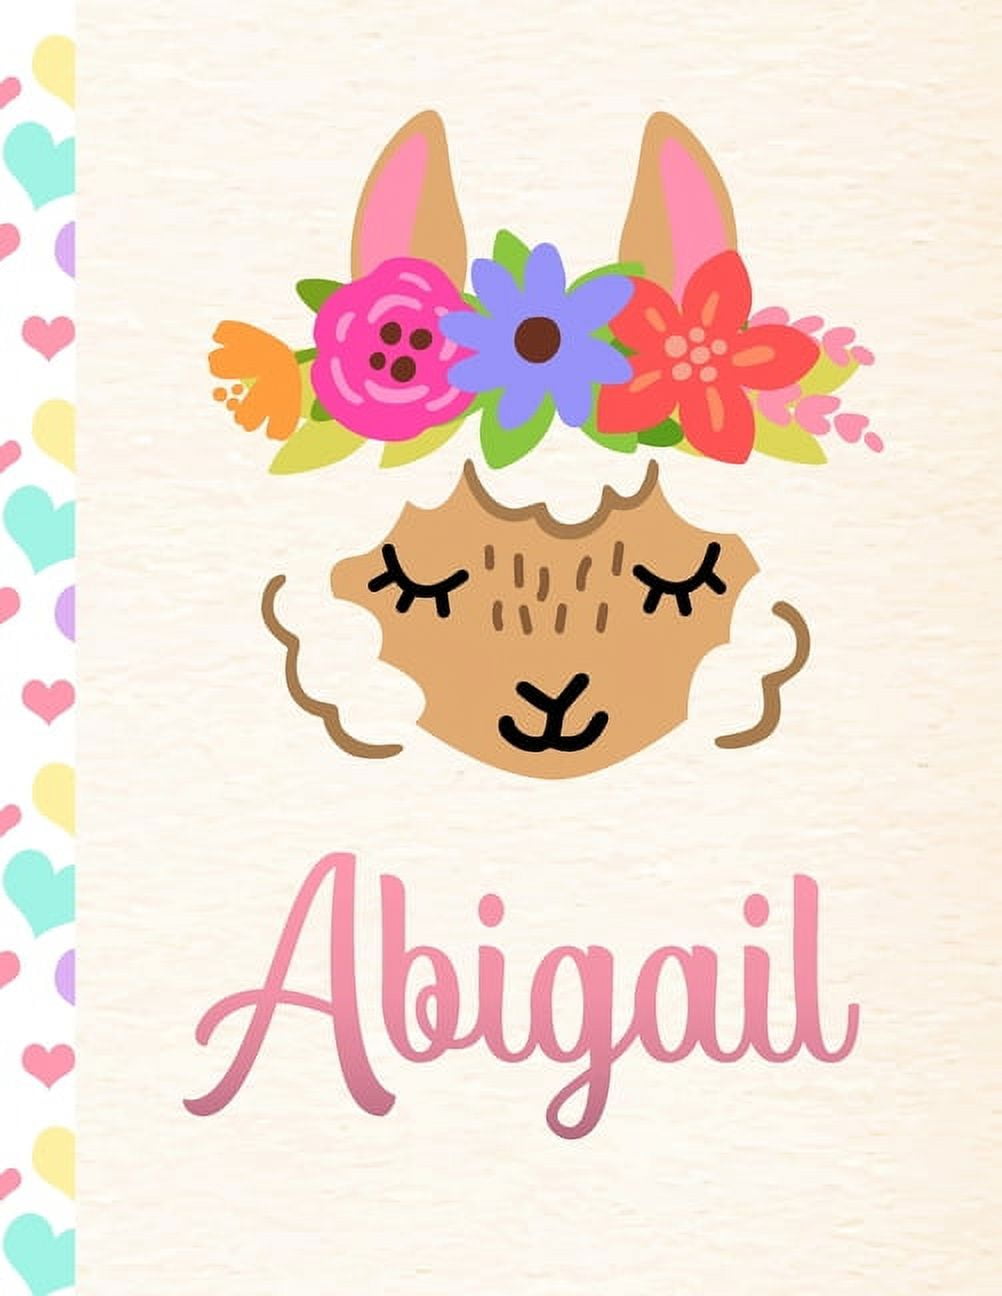 Abigail: Personalized Llama Sketchbook For Girls With Pink Name - 8.5x11  110 Pages. Doodle, Draw, Sketch, Create! (Other) 